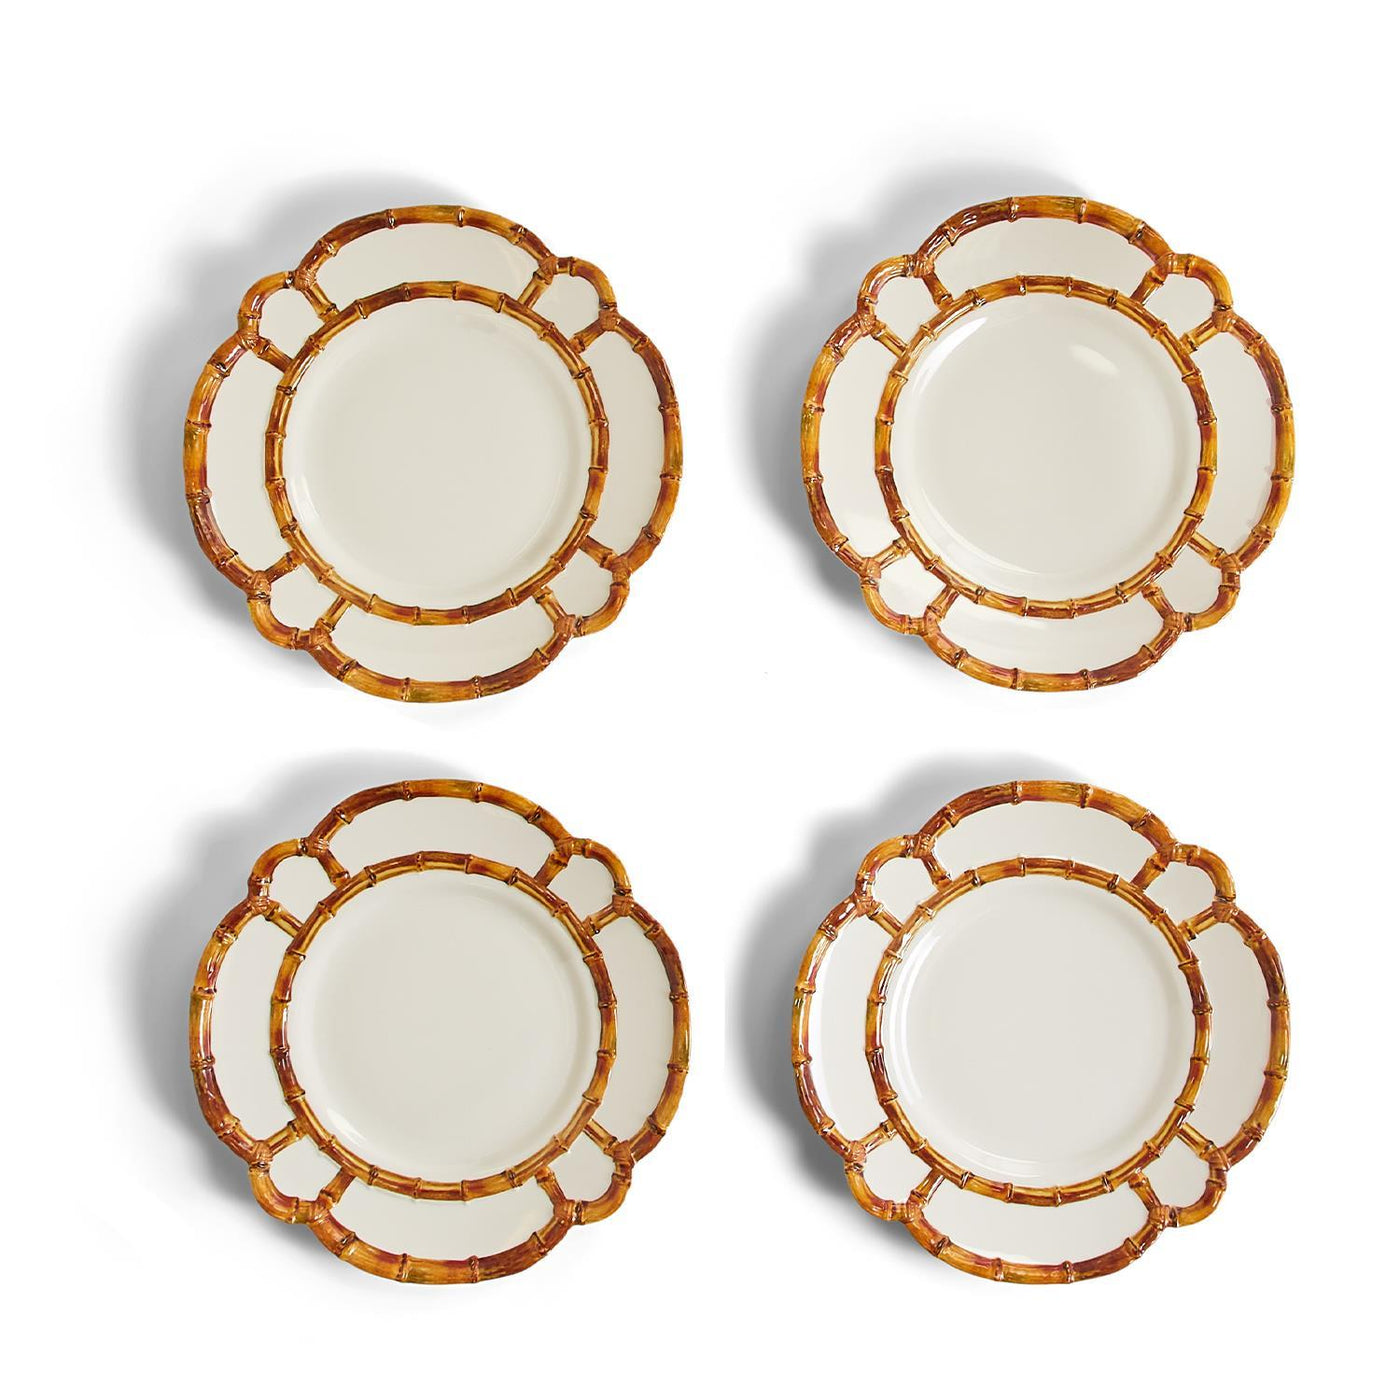 Bamboo Touch Dinner Plate